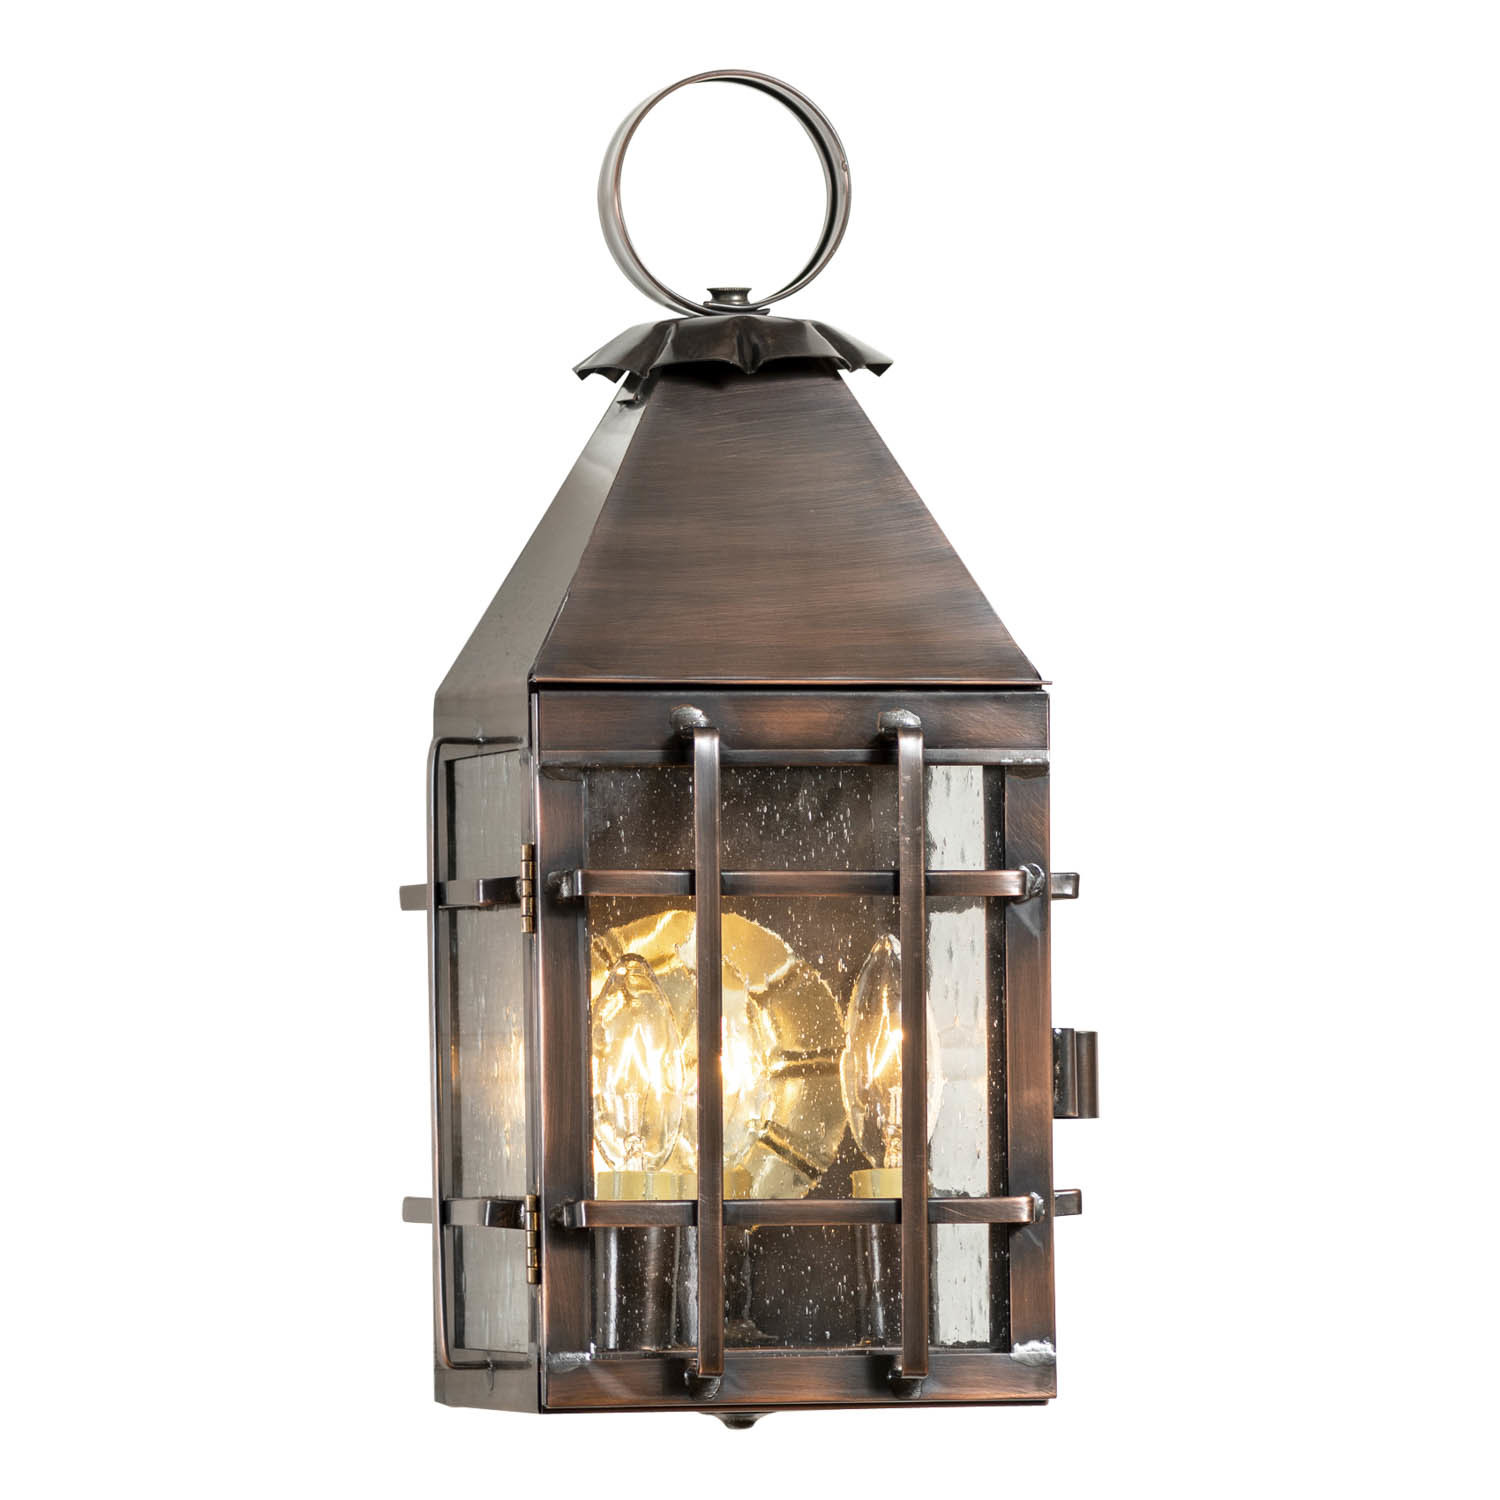 Irvins Country Tinware Barn Outdoor Wall Light in Solid Antique Copper - 3 Light - $331.60